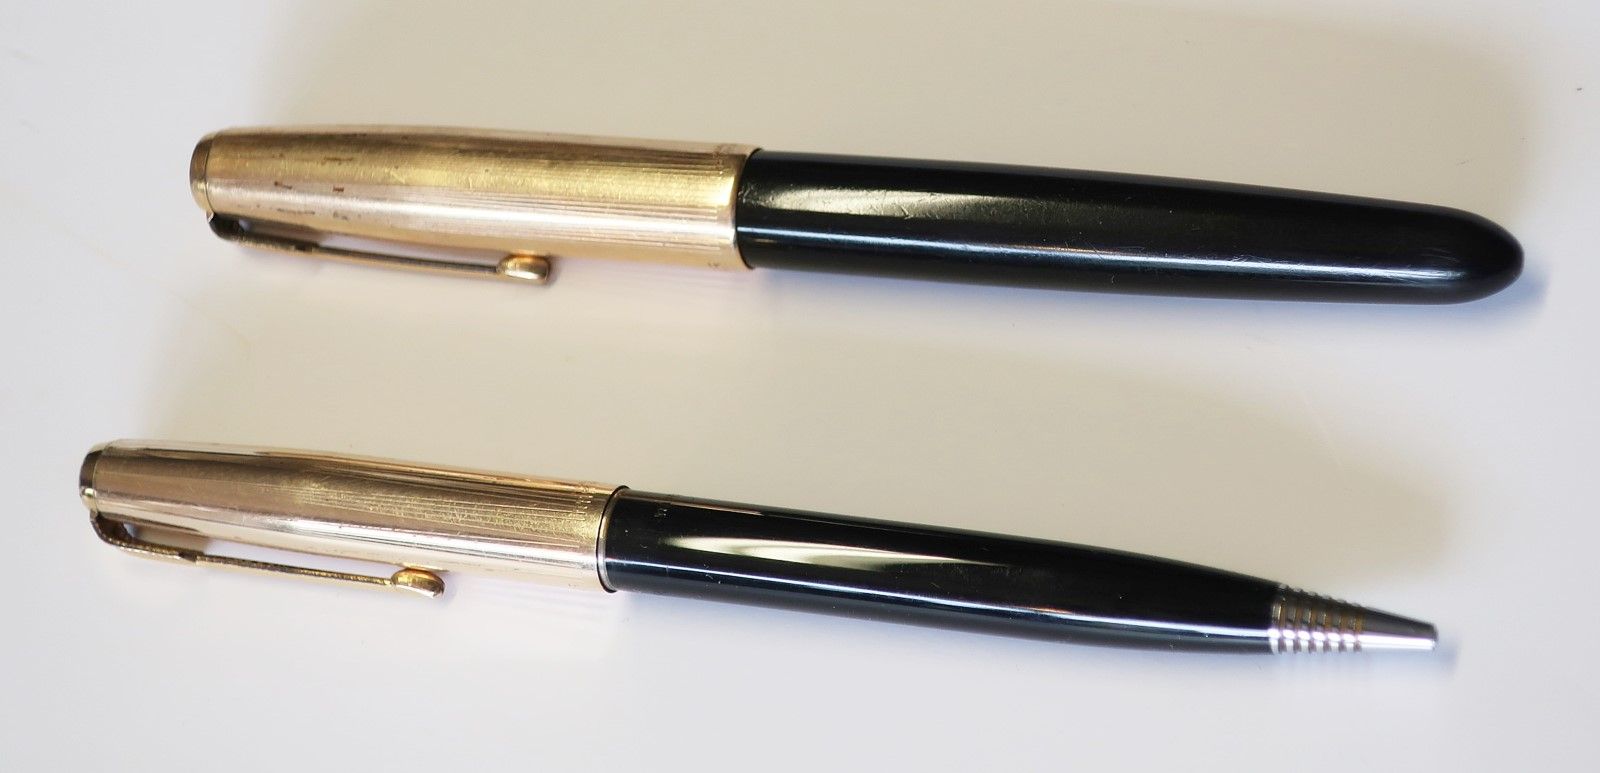 Null Parker fountain pen and Parker ballpoint pen,together